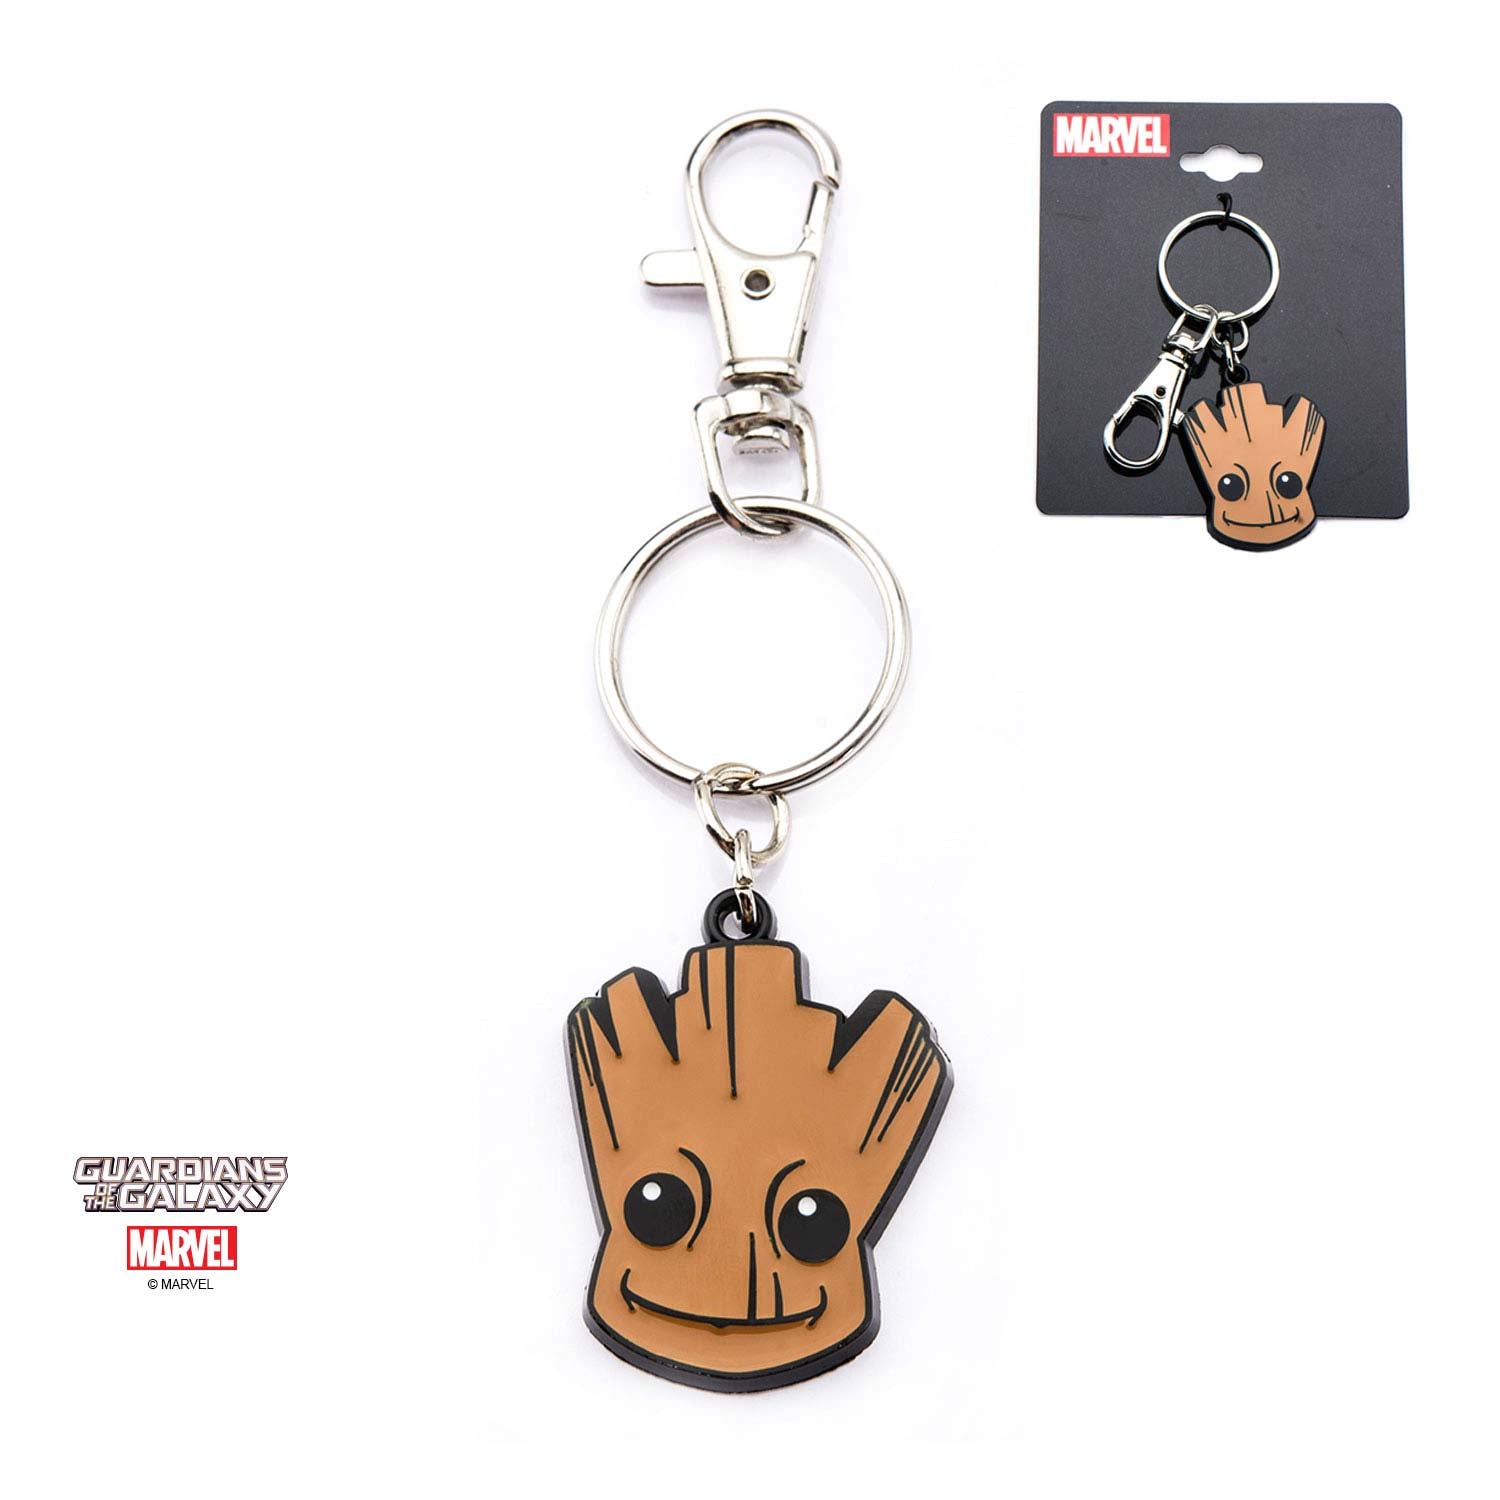 Marvel Guardians of the Galaxy Groot Key Chain